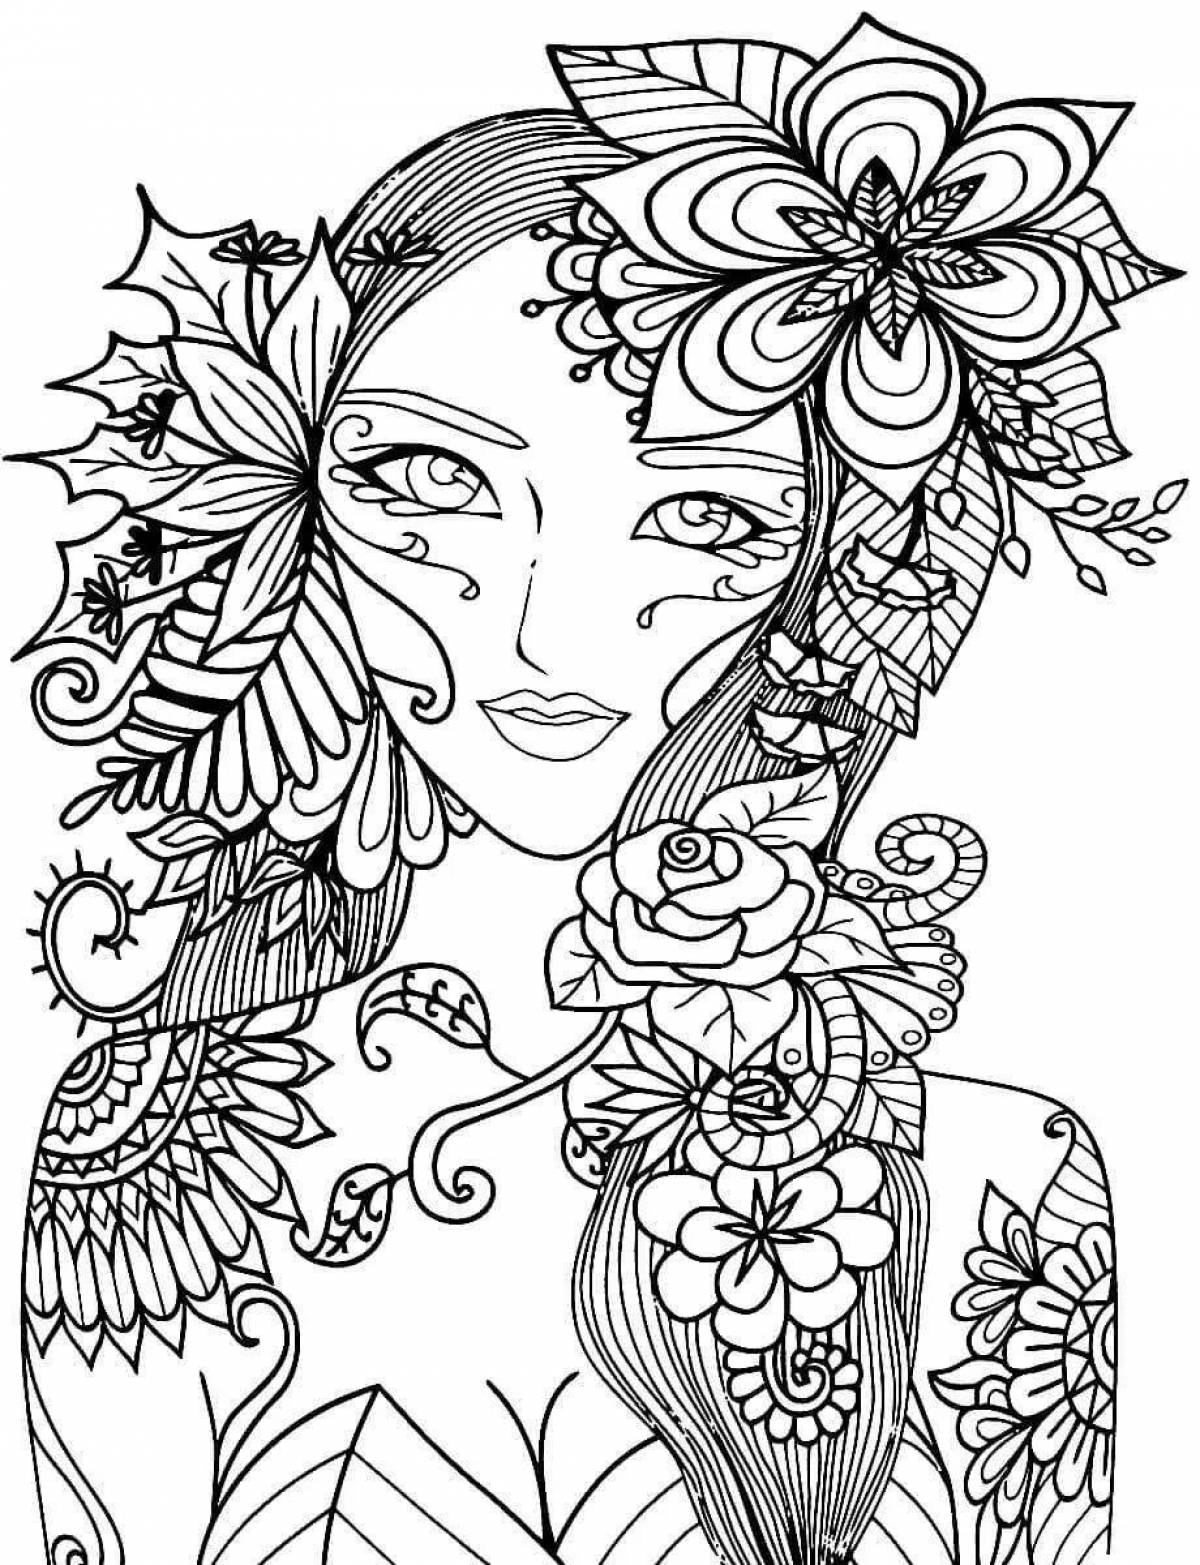 Joyful coloring for 12 years for girls antistress